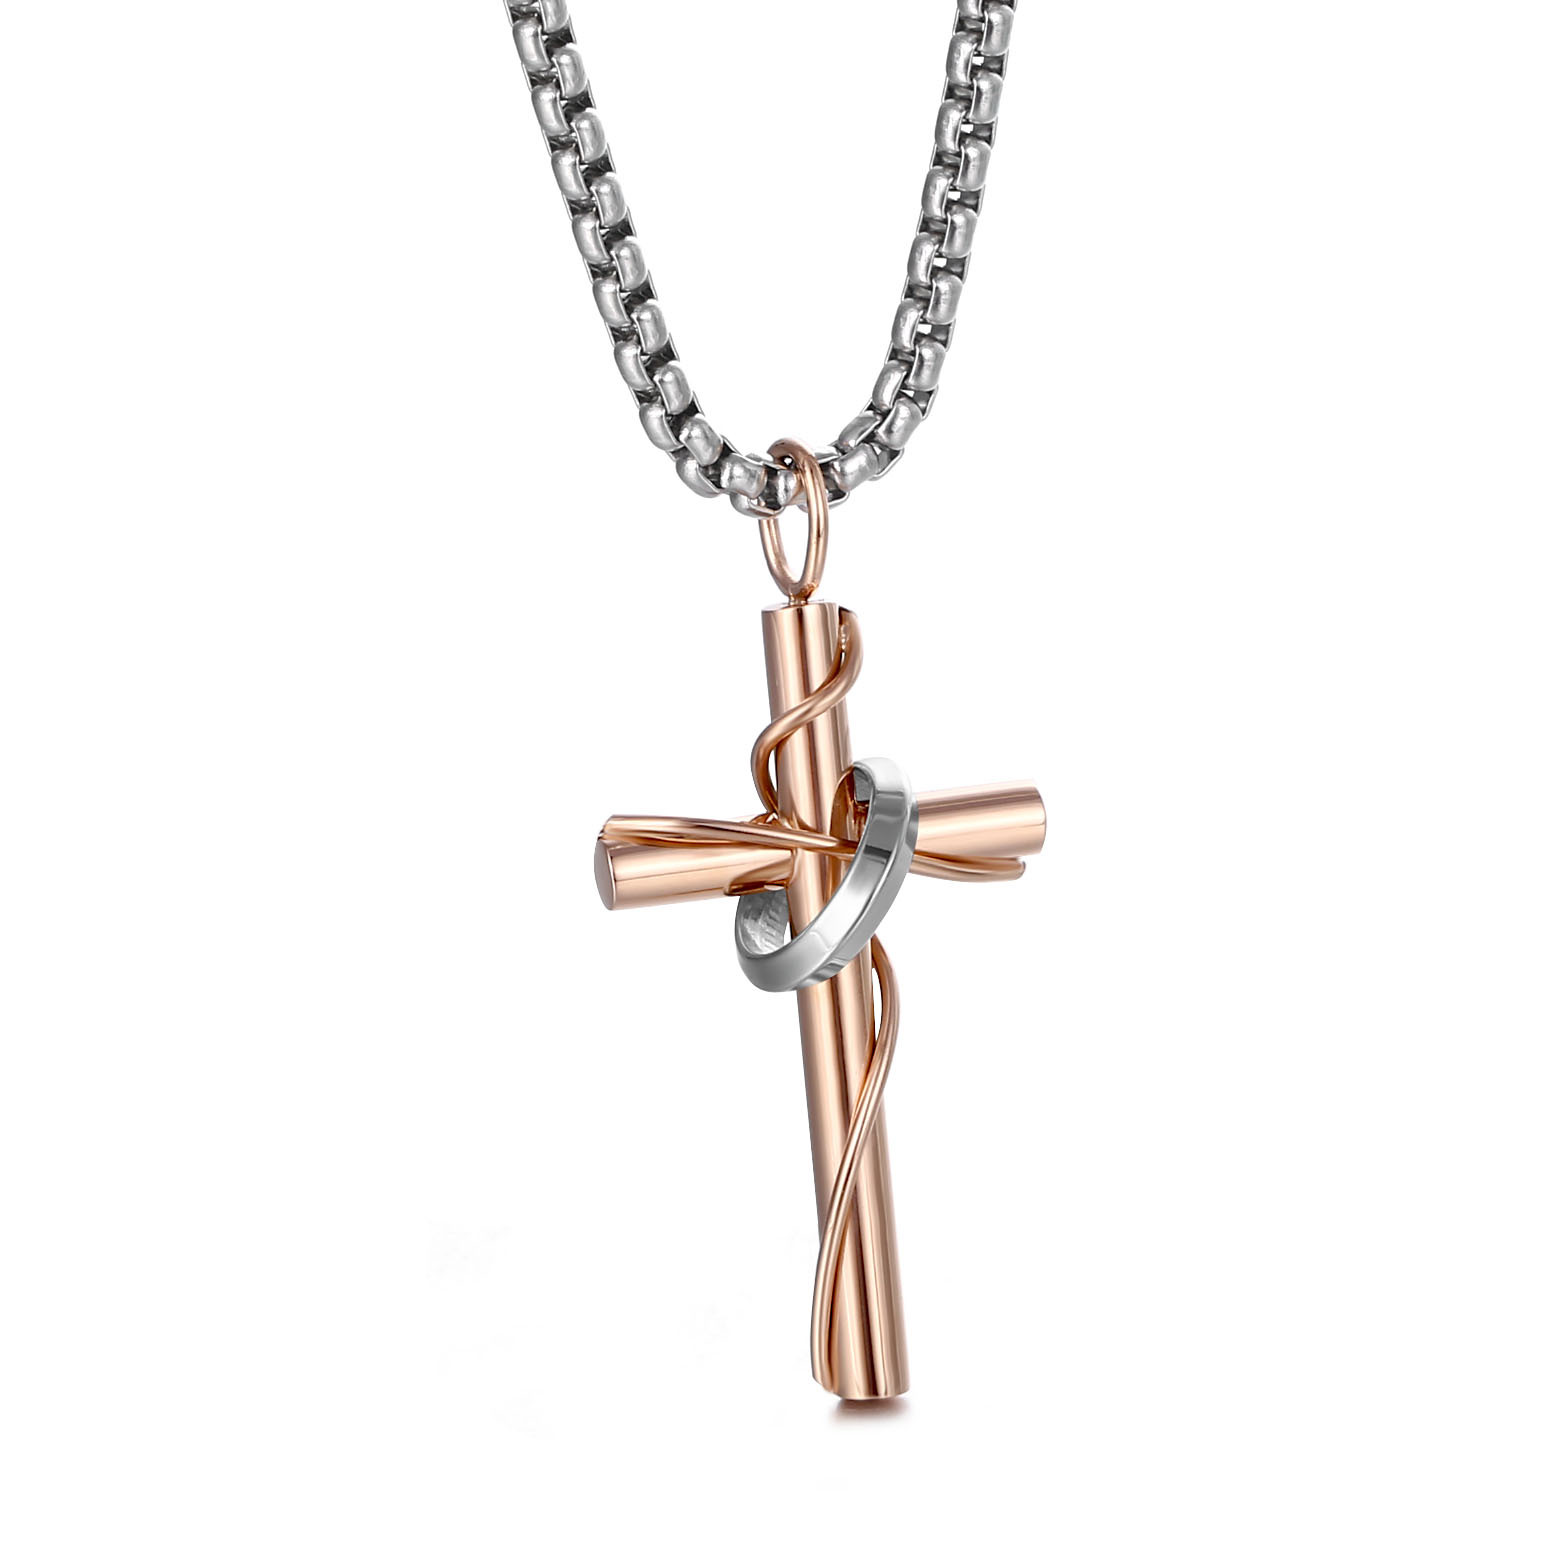 6:Rose gold with chain